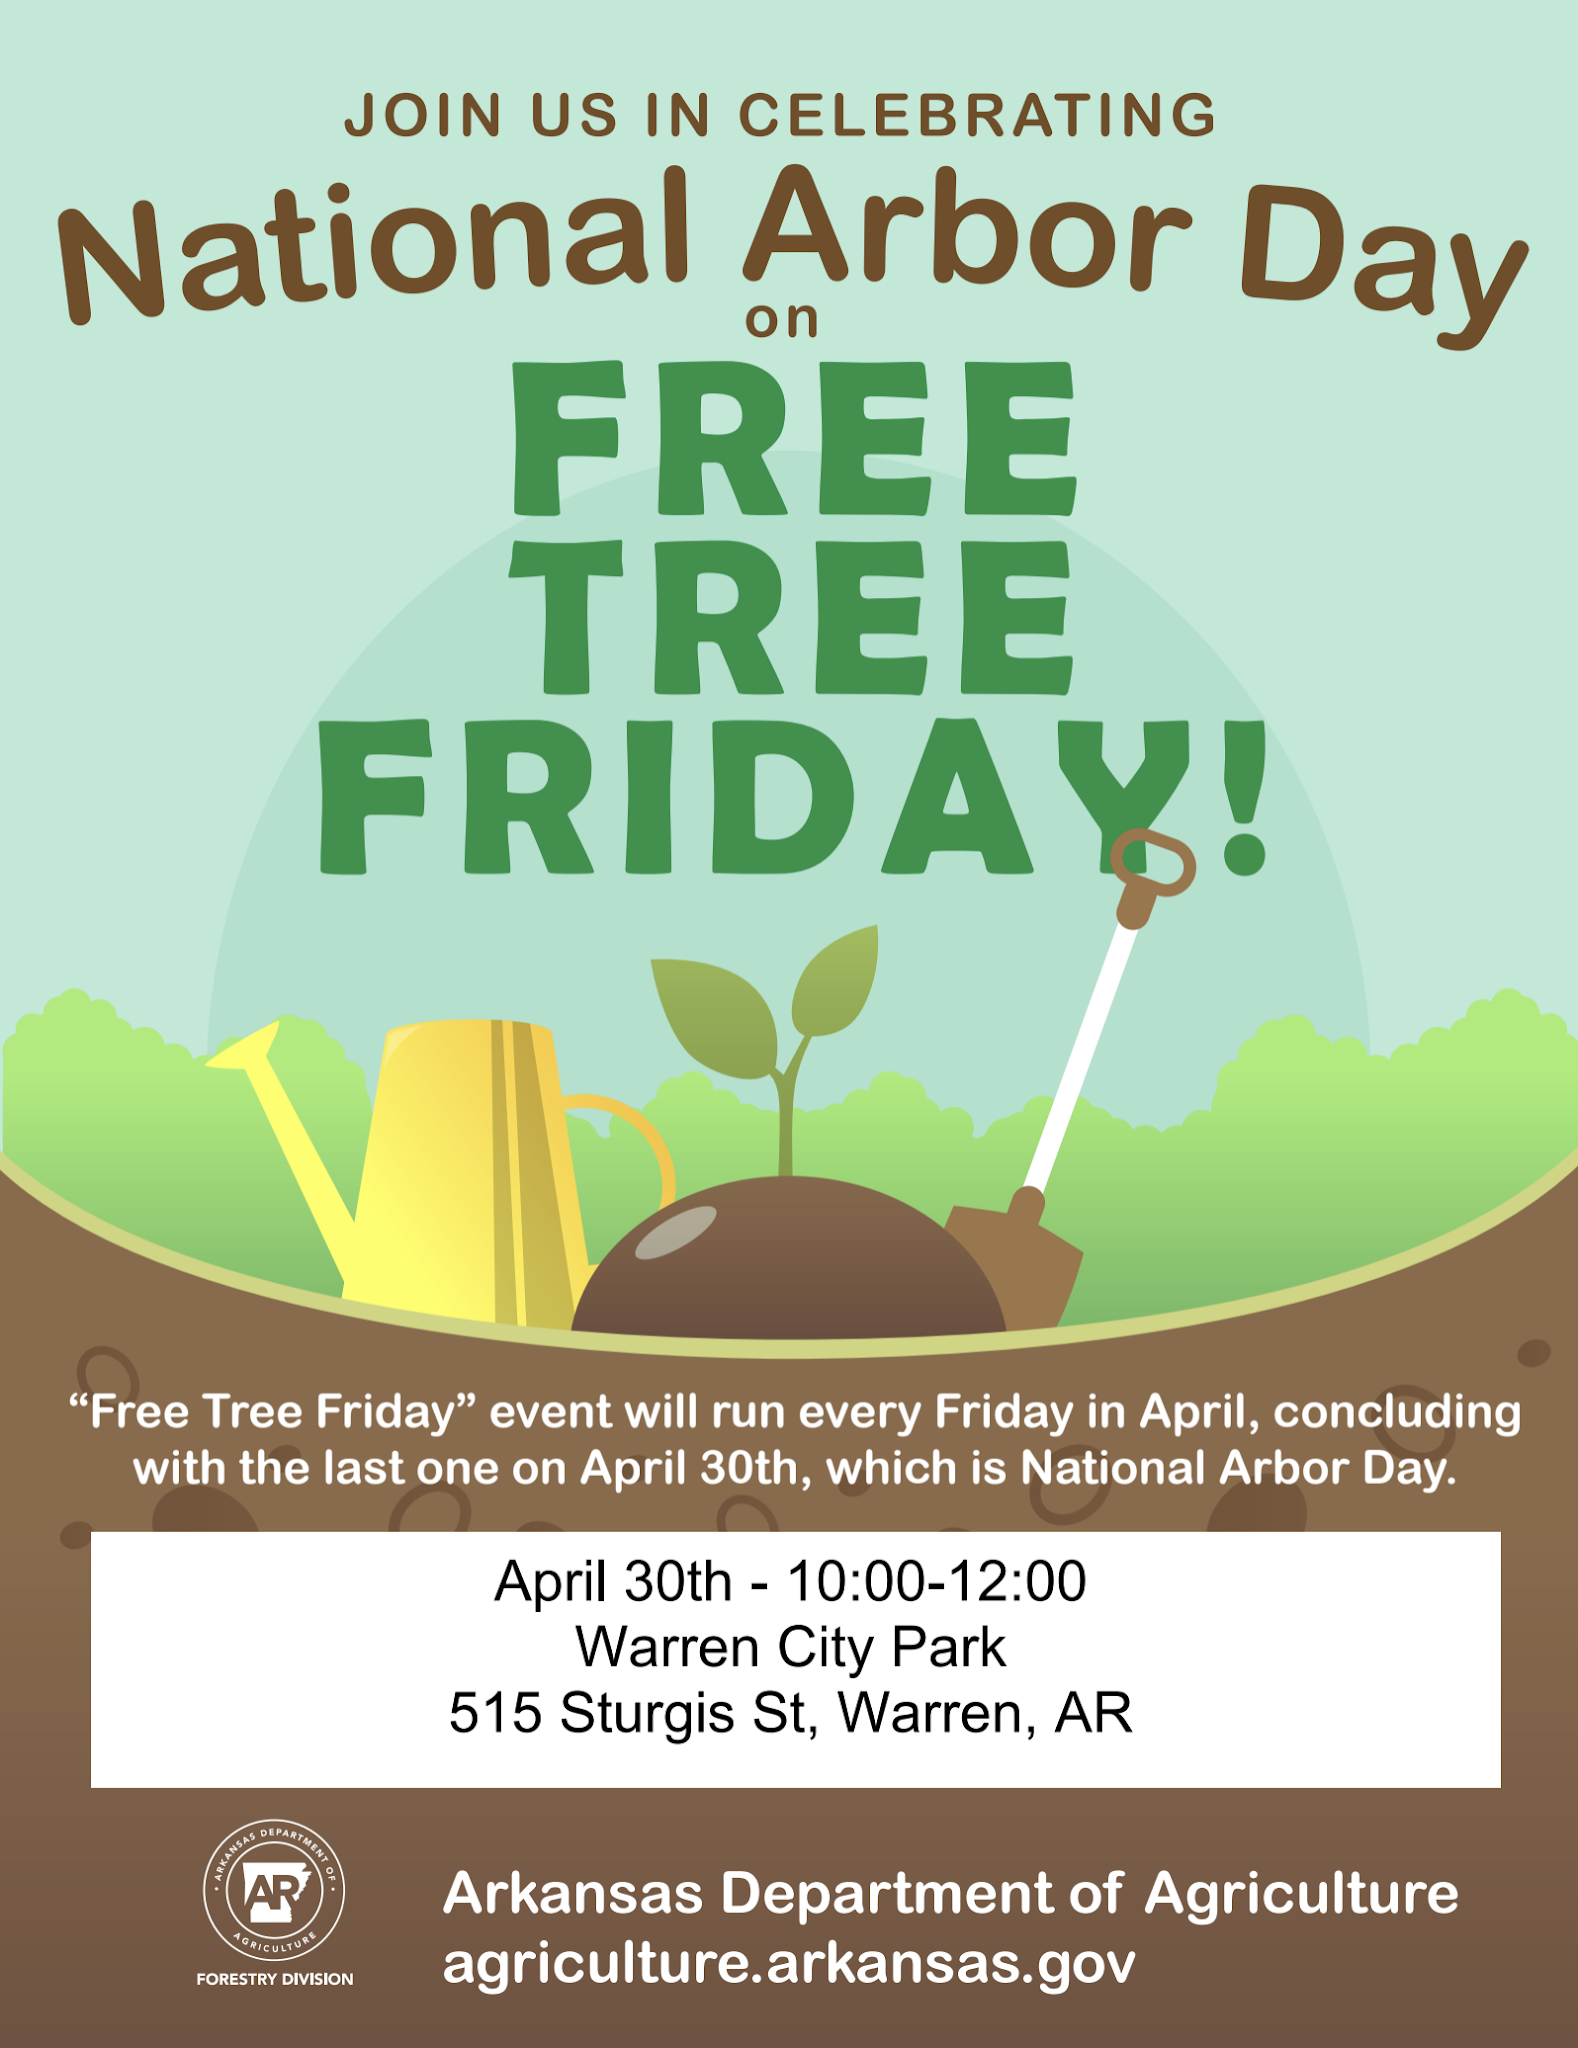 Outdoors Celebrate National Arbor Day with Free Tree Friday